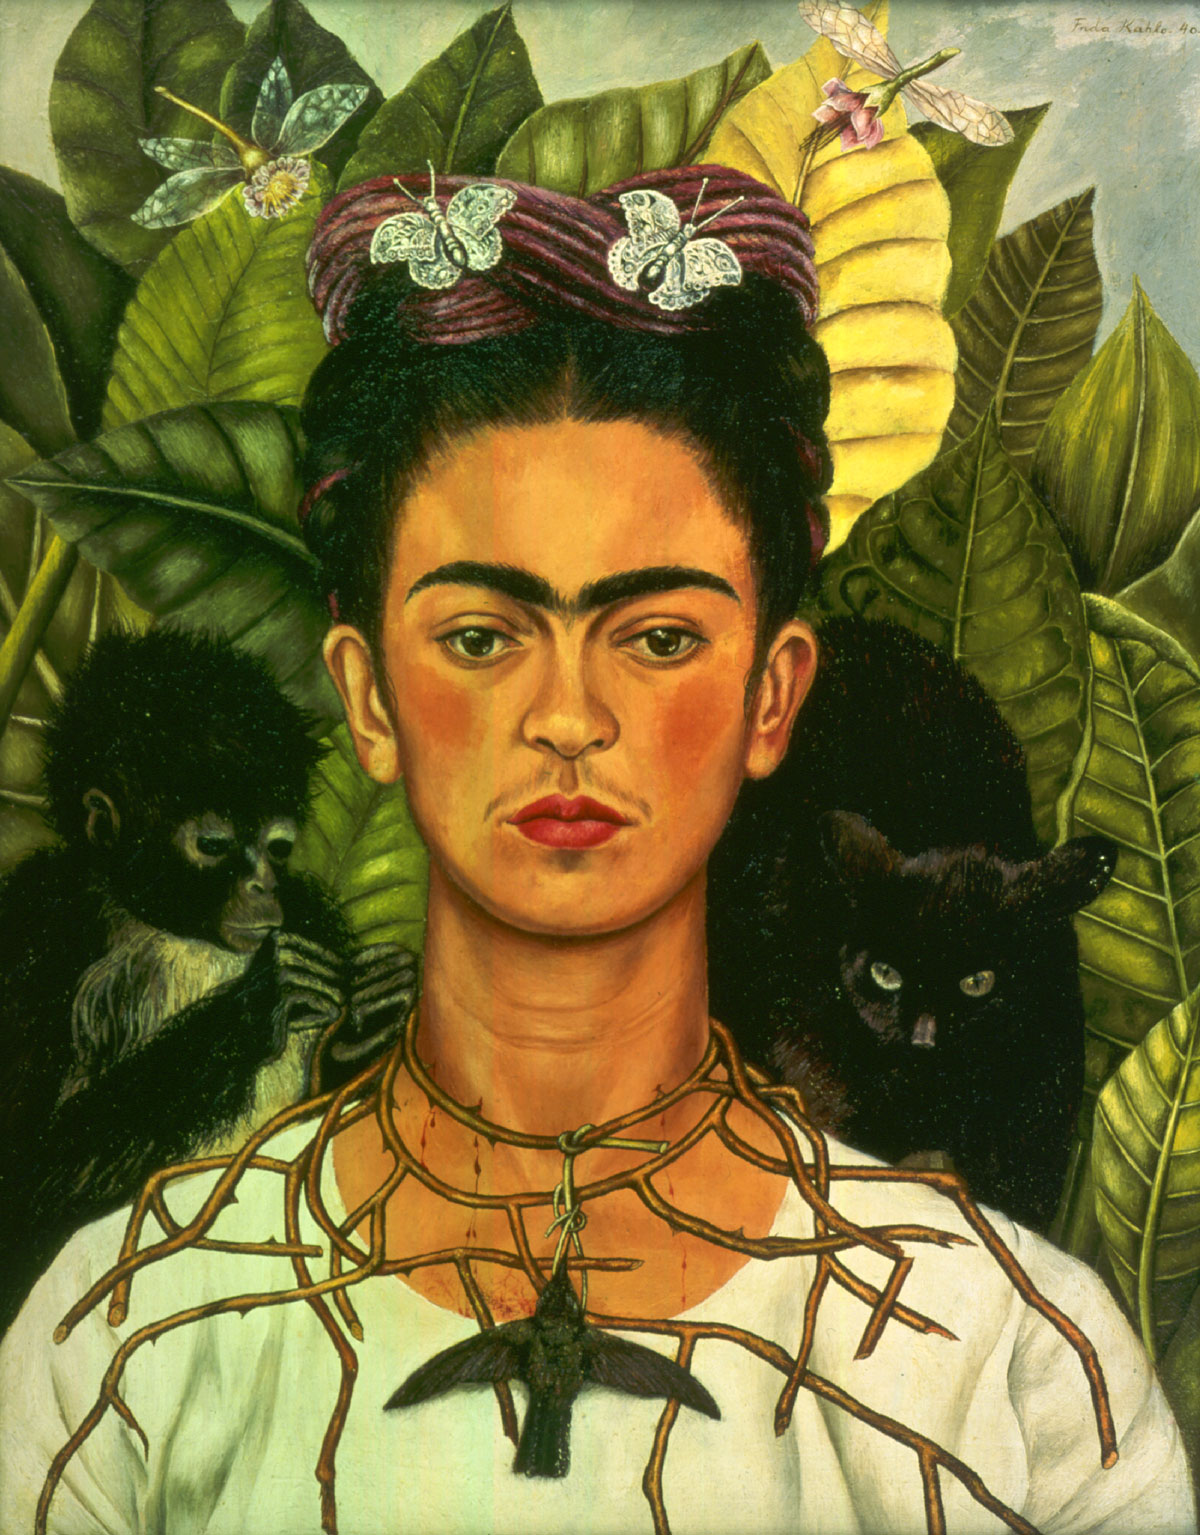 Frida Kahlo, Self-Portrait with Thorn Necklace and Hummingbird, 1940. © 2014 Banco de México Diego Rivera Frida Kahlo Museums Trust, Mexico, D.F. / Artists Rights Society (ARS), New York